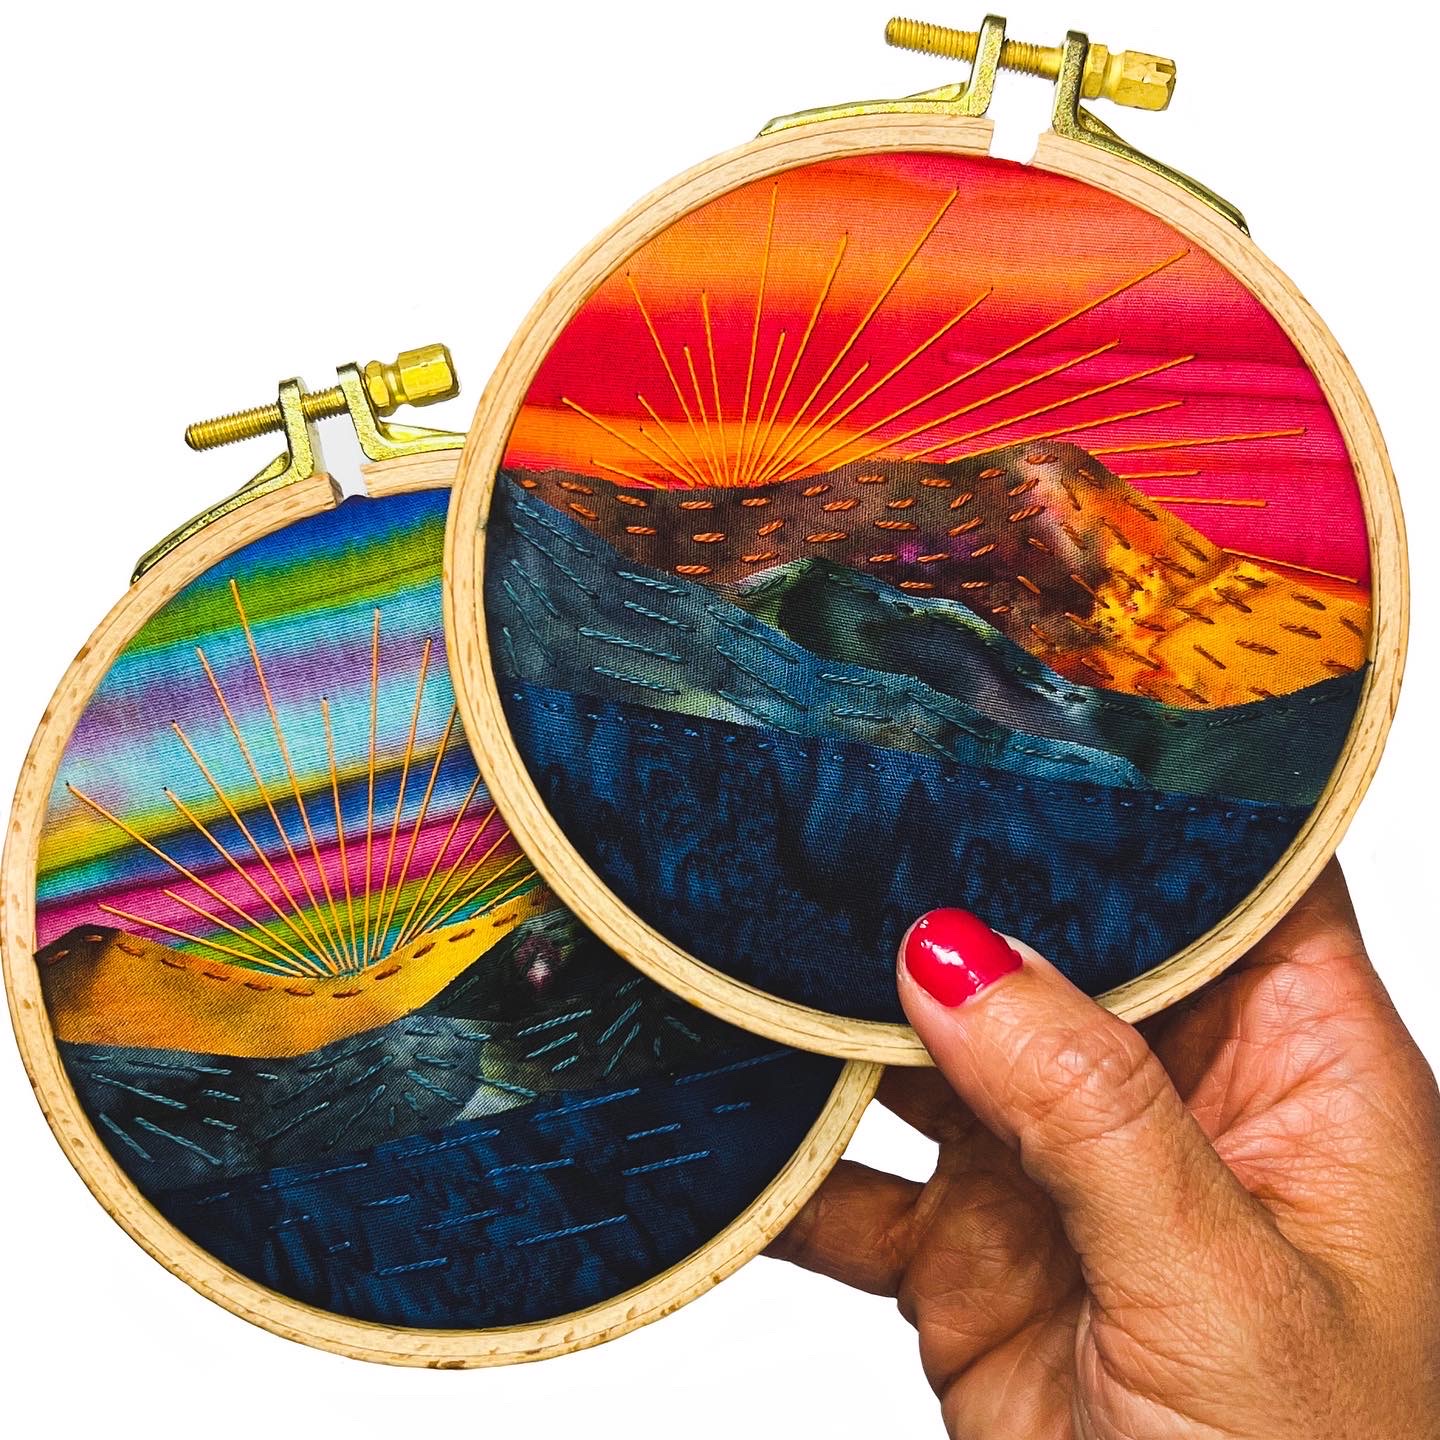 Embroidered fabric landscapes